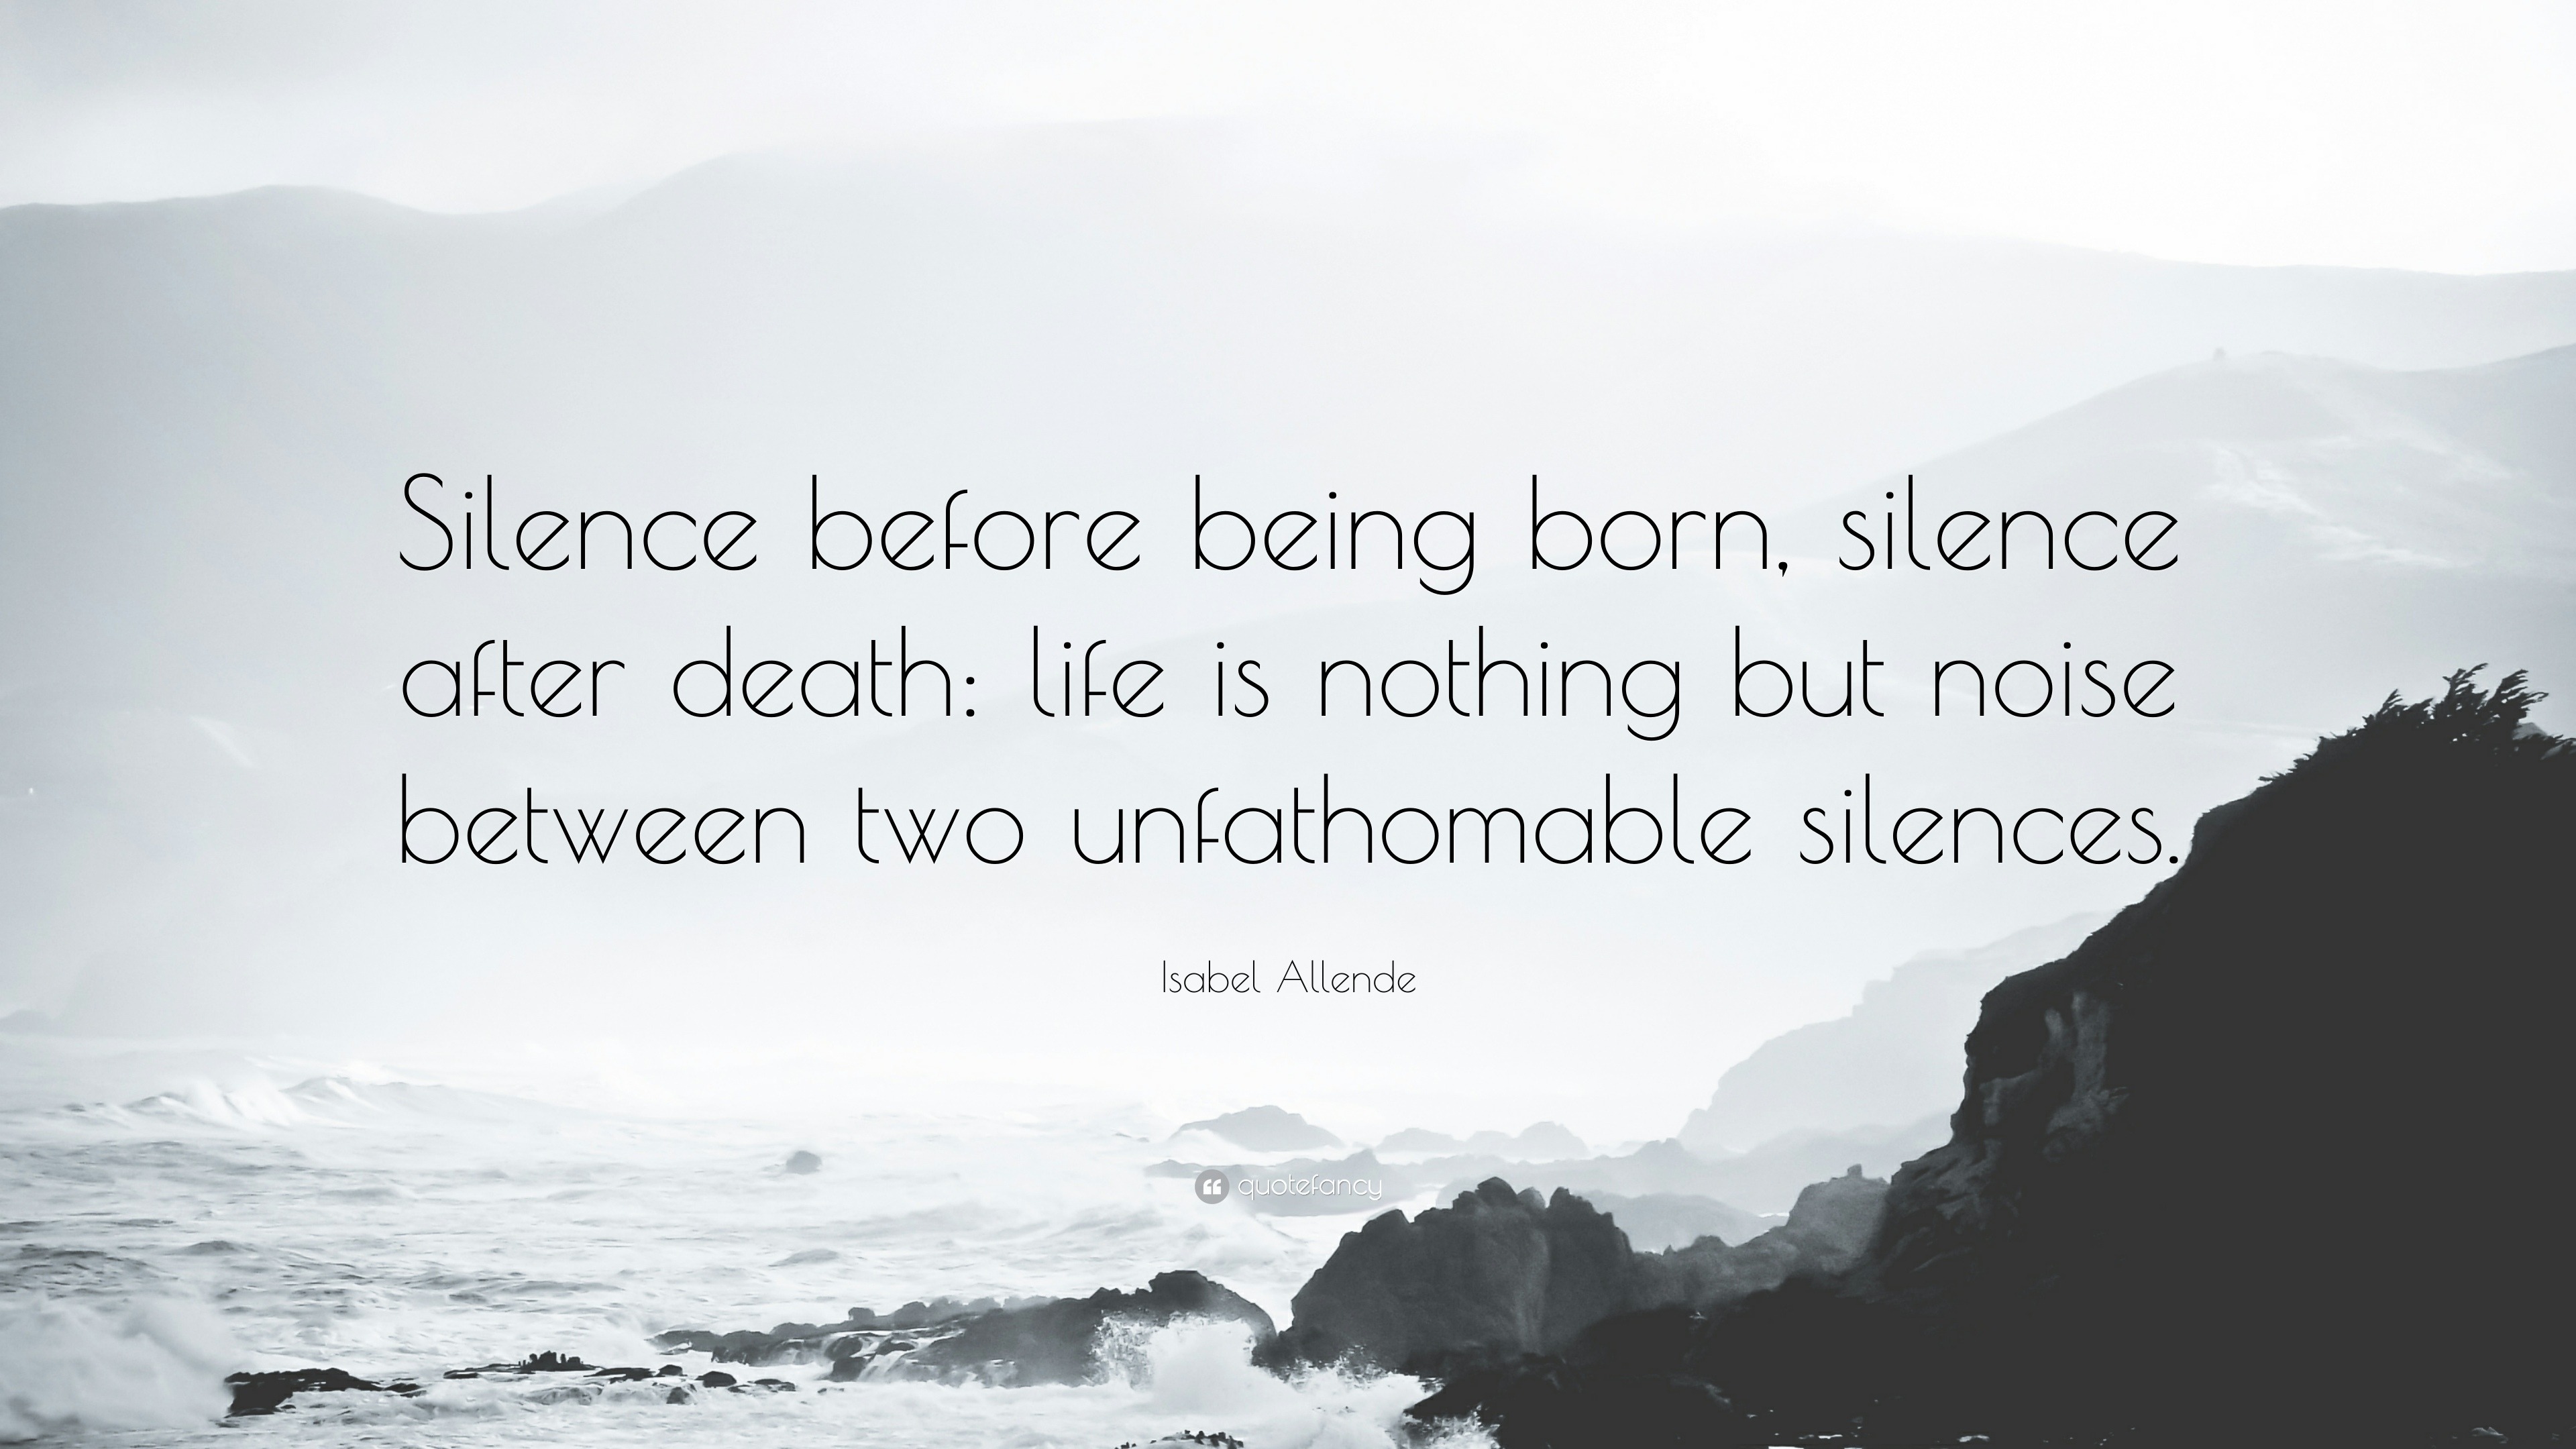 Isabel Allende Quote “Silence before being born silence after life is